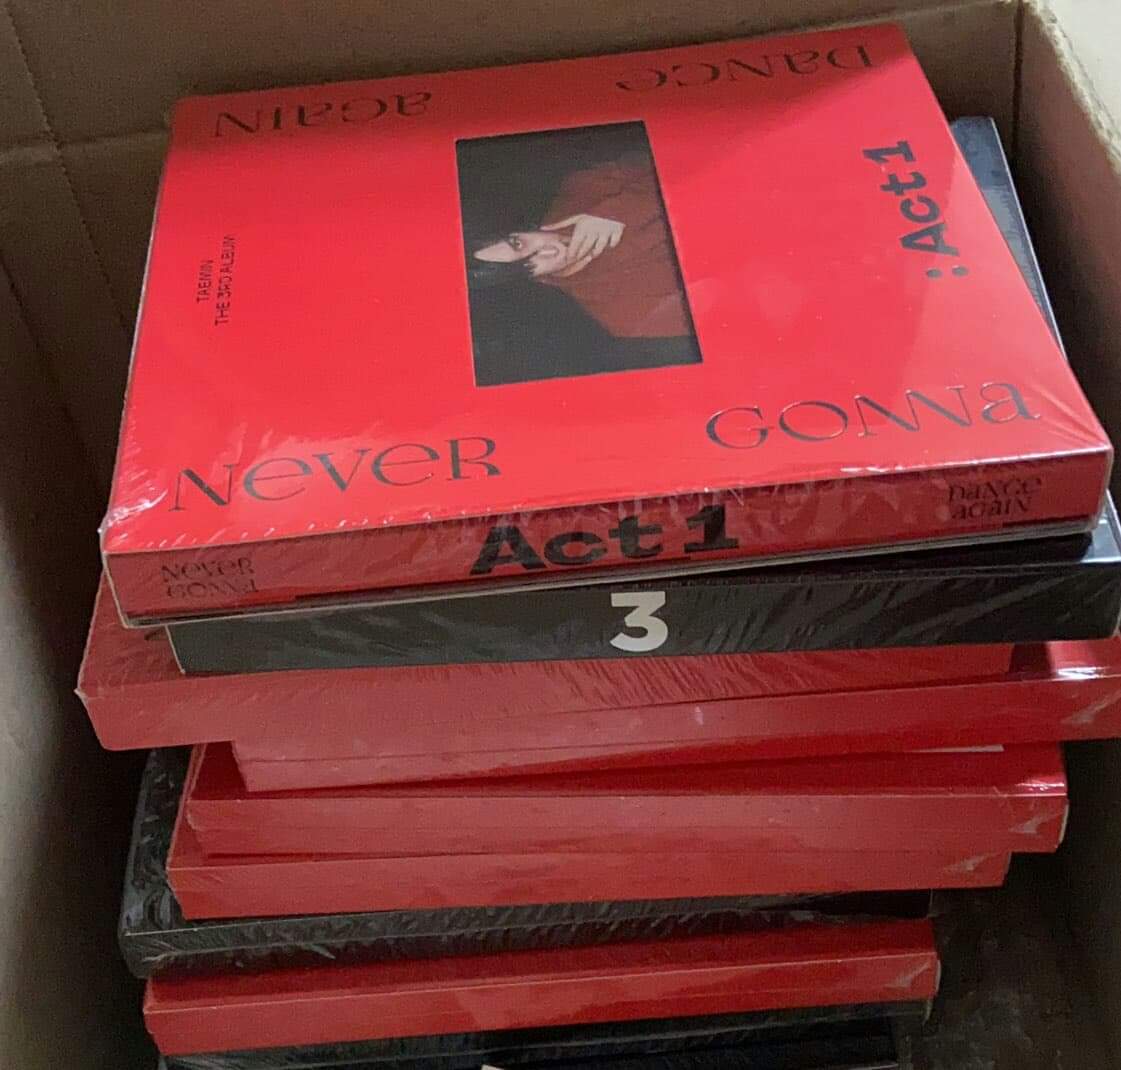 WTS/LFB(TO CHECK ITEM/S AVAILABILITY PLEASE CHECK THREAD)UNSEALED TAEMIN ACT1: NEVER GONNA DANCE AGAIN ALBUMSINCLUSIONS: CD+PB+POSTER250 ALL IN + LSFNORMAL ETADOP: OCTOBER 26 - NOVEMBER 13FOR MORE DETAILS PLEASE DM US #SilverLiningAvailableItems